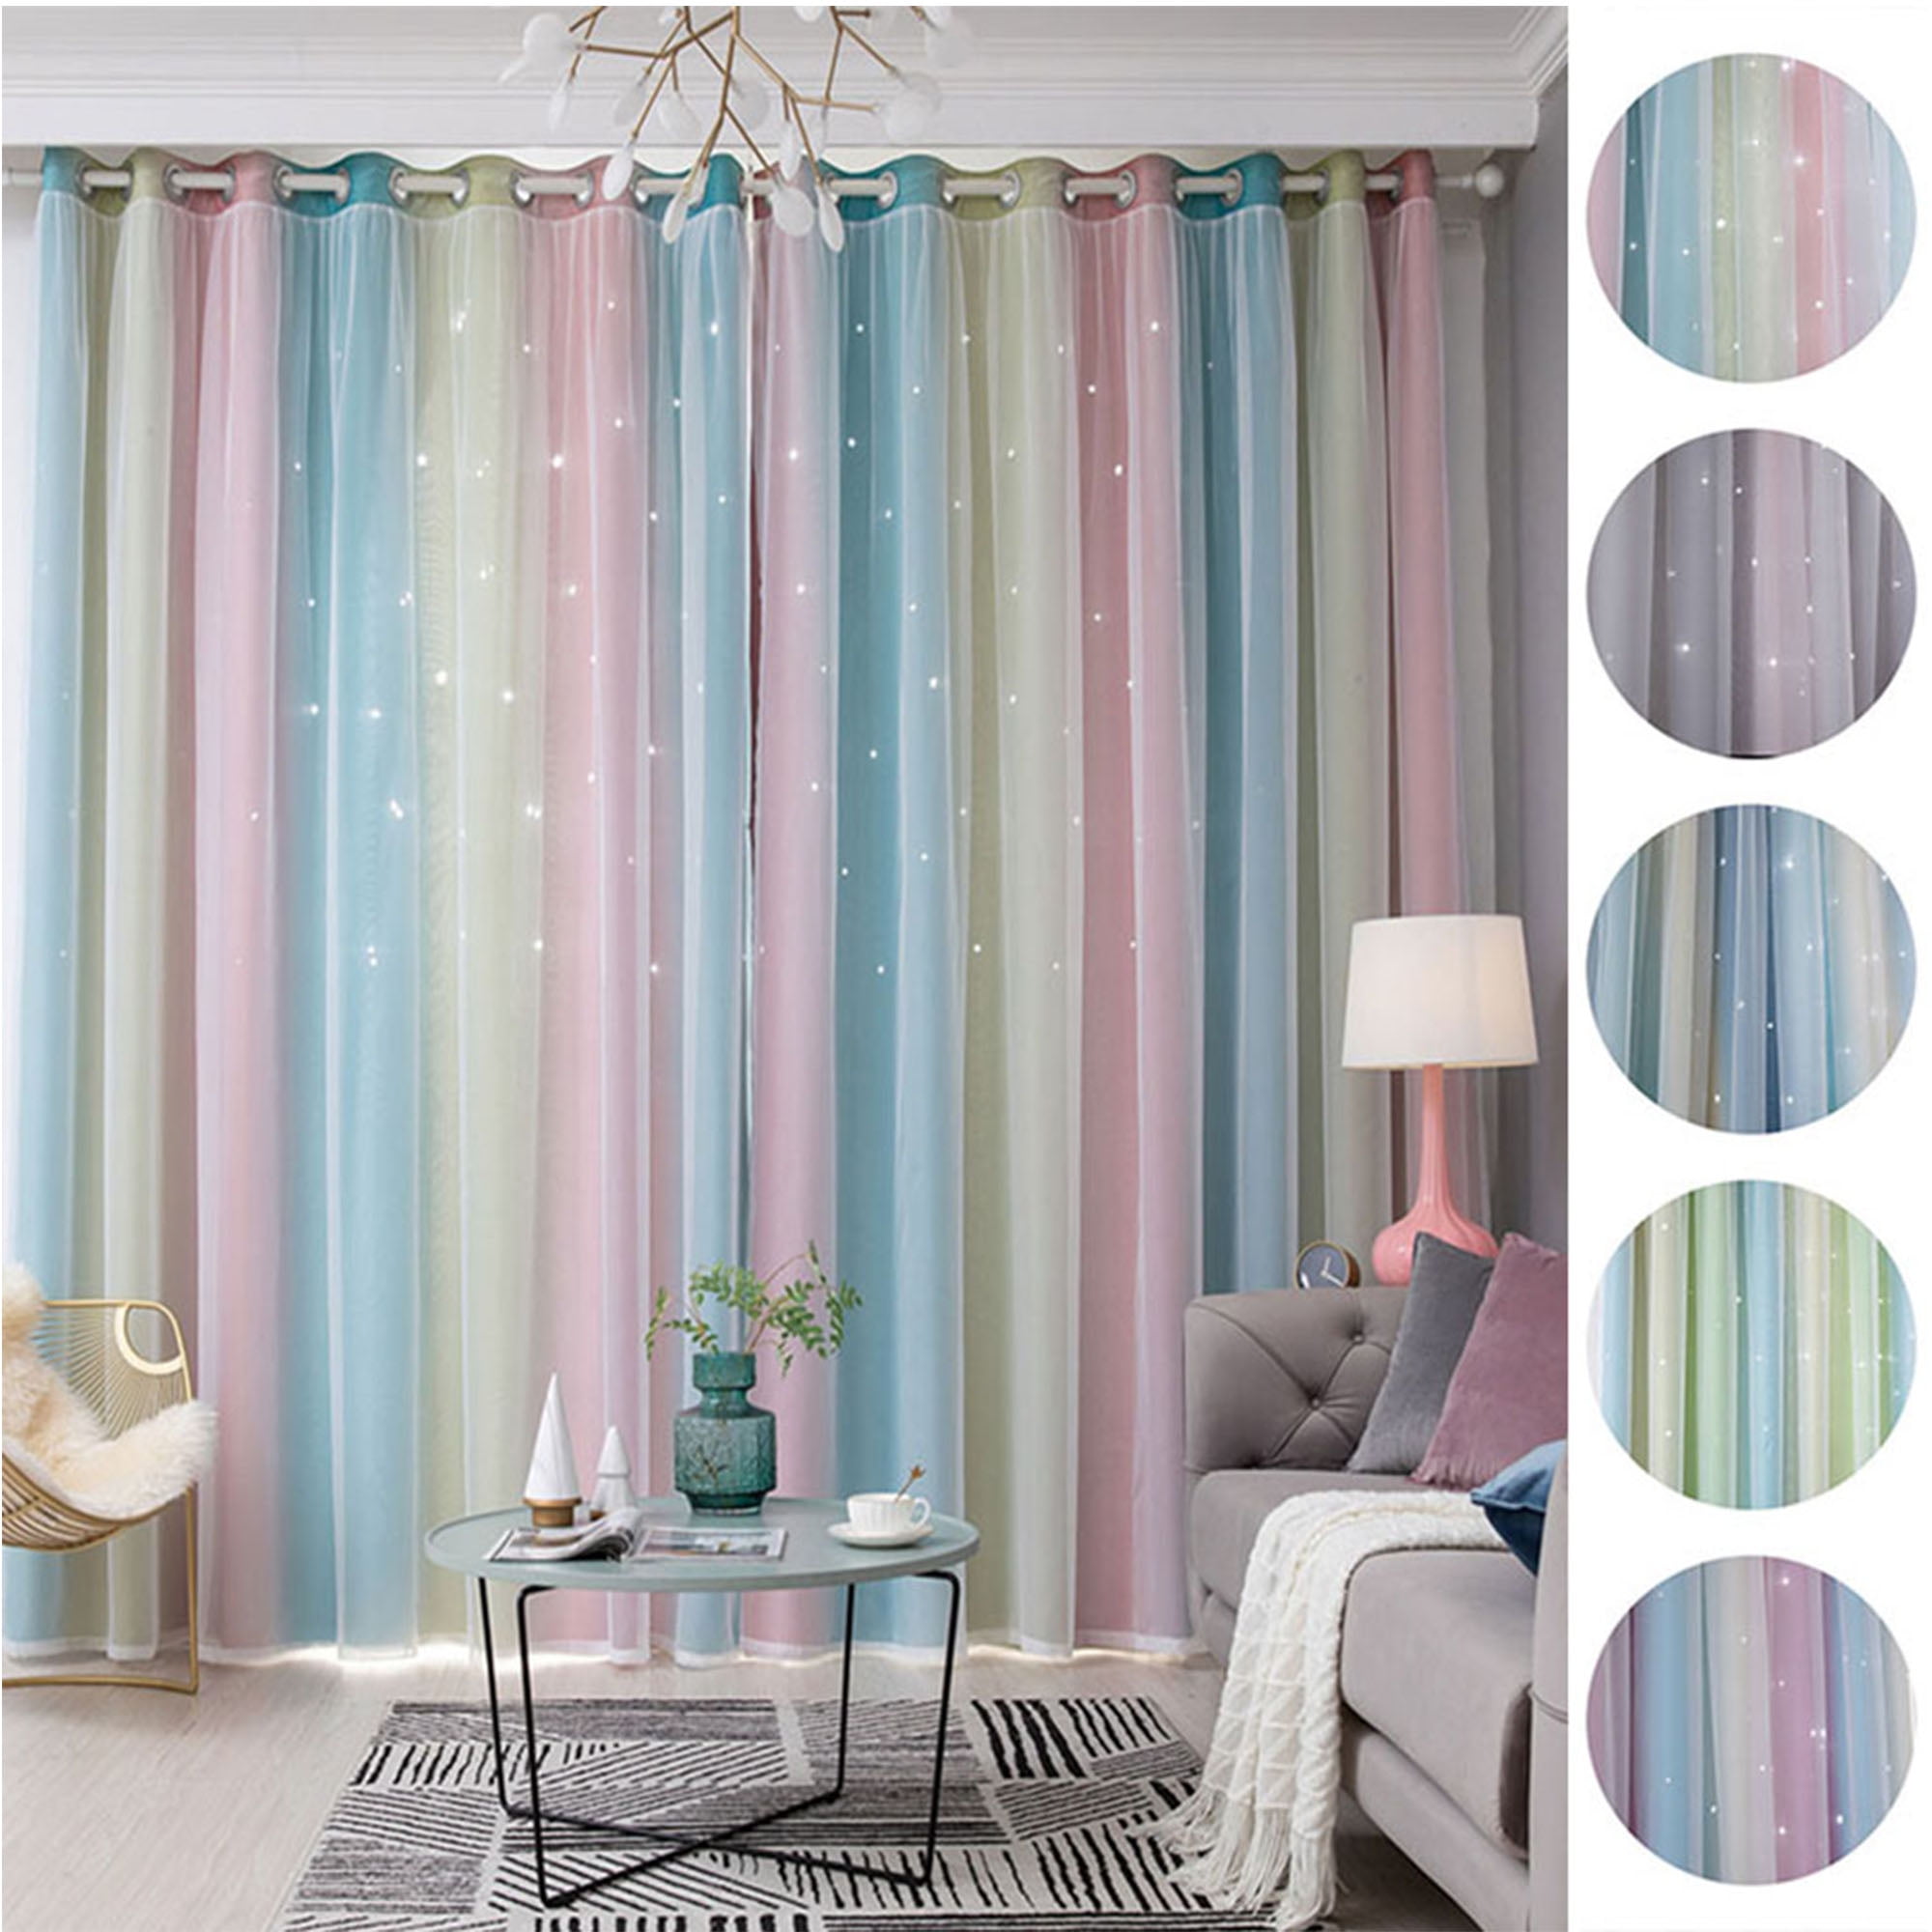 2-Layer Stars Tulle & Blackout Curtains Gradient Room Starry Girl Kids Bedroom 